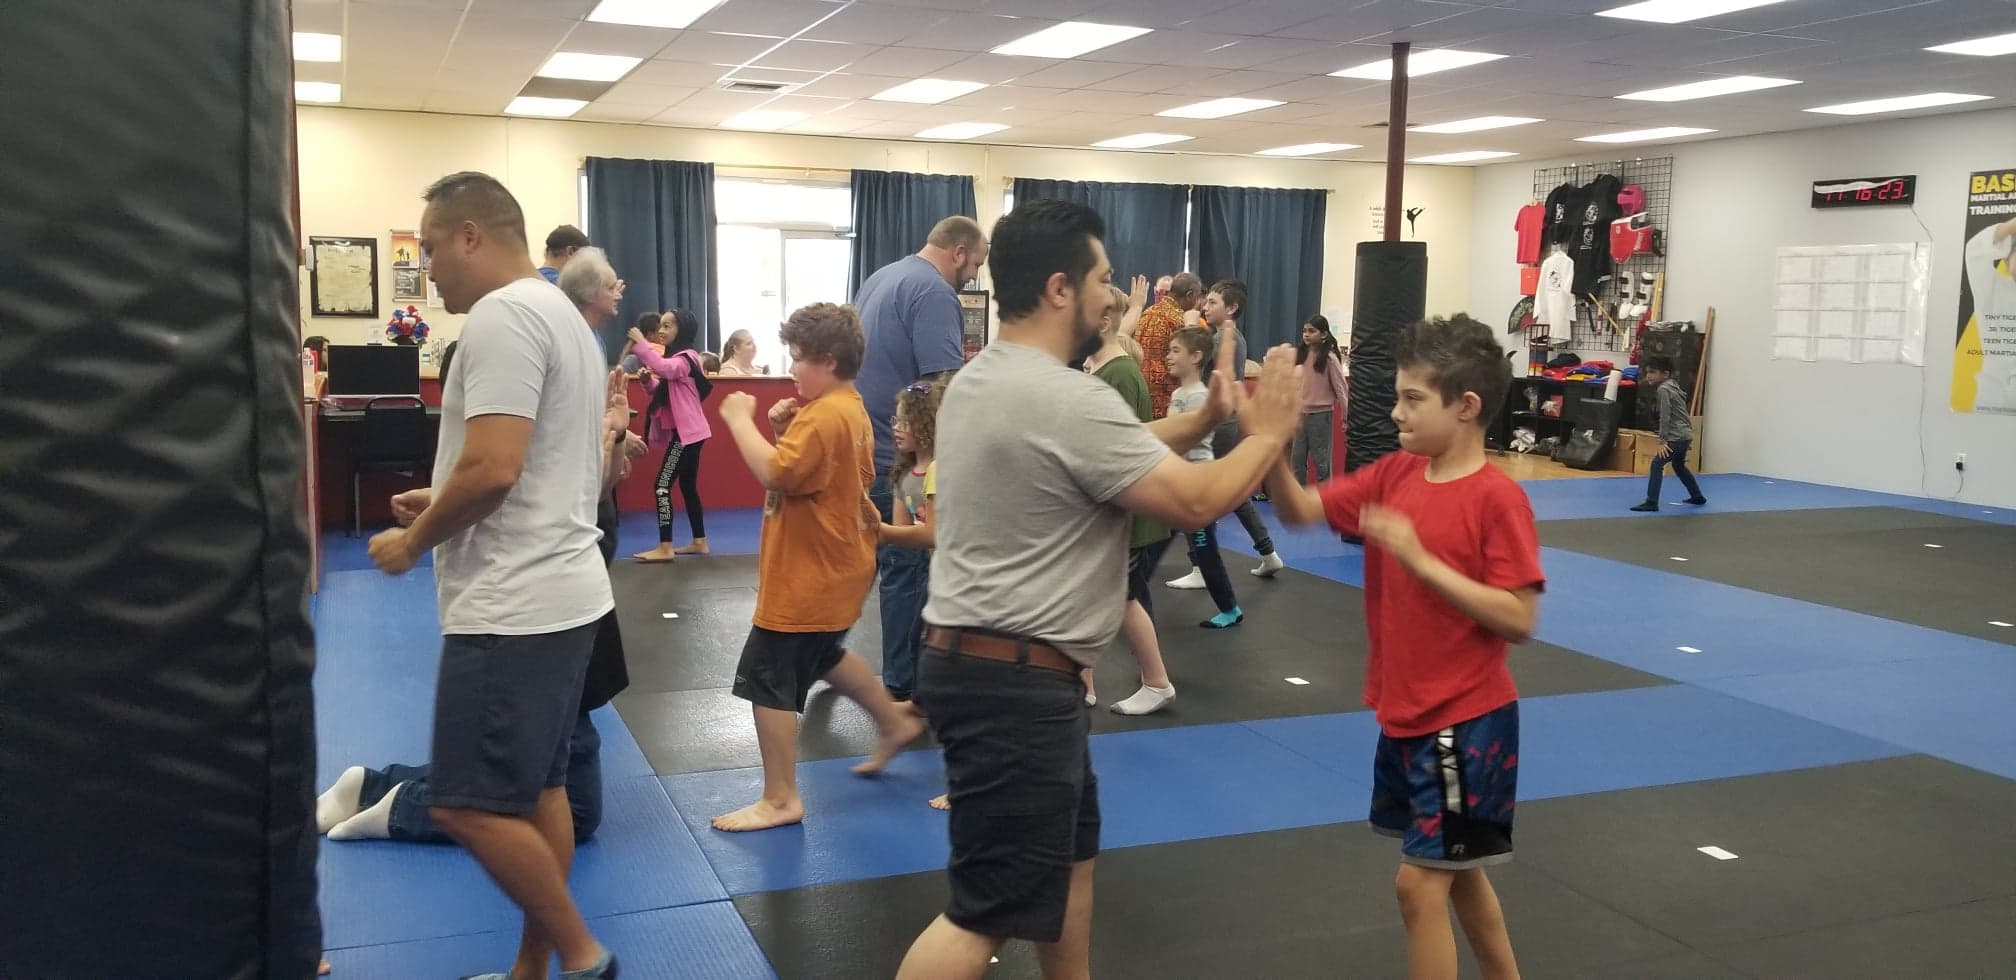 academy of kempo martial arts school karate dads working with kids